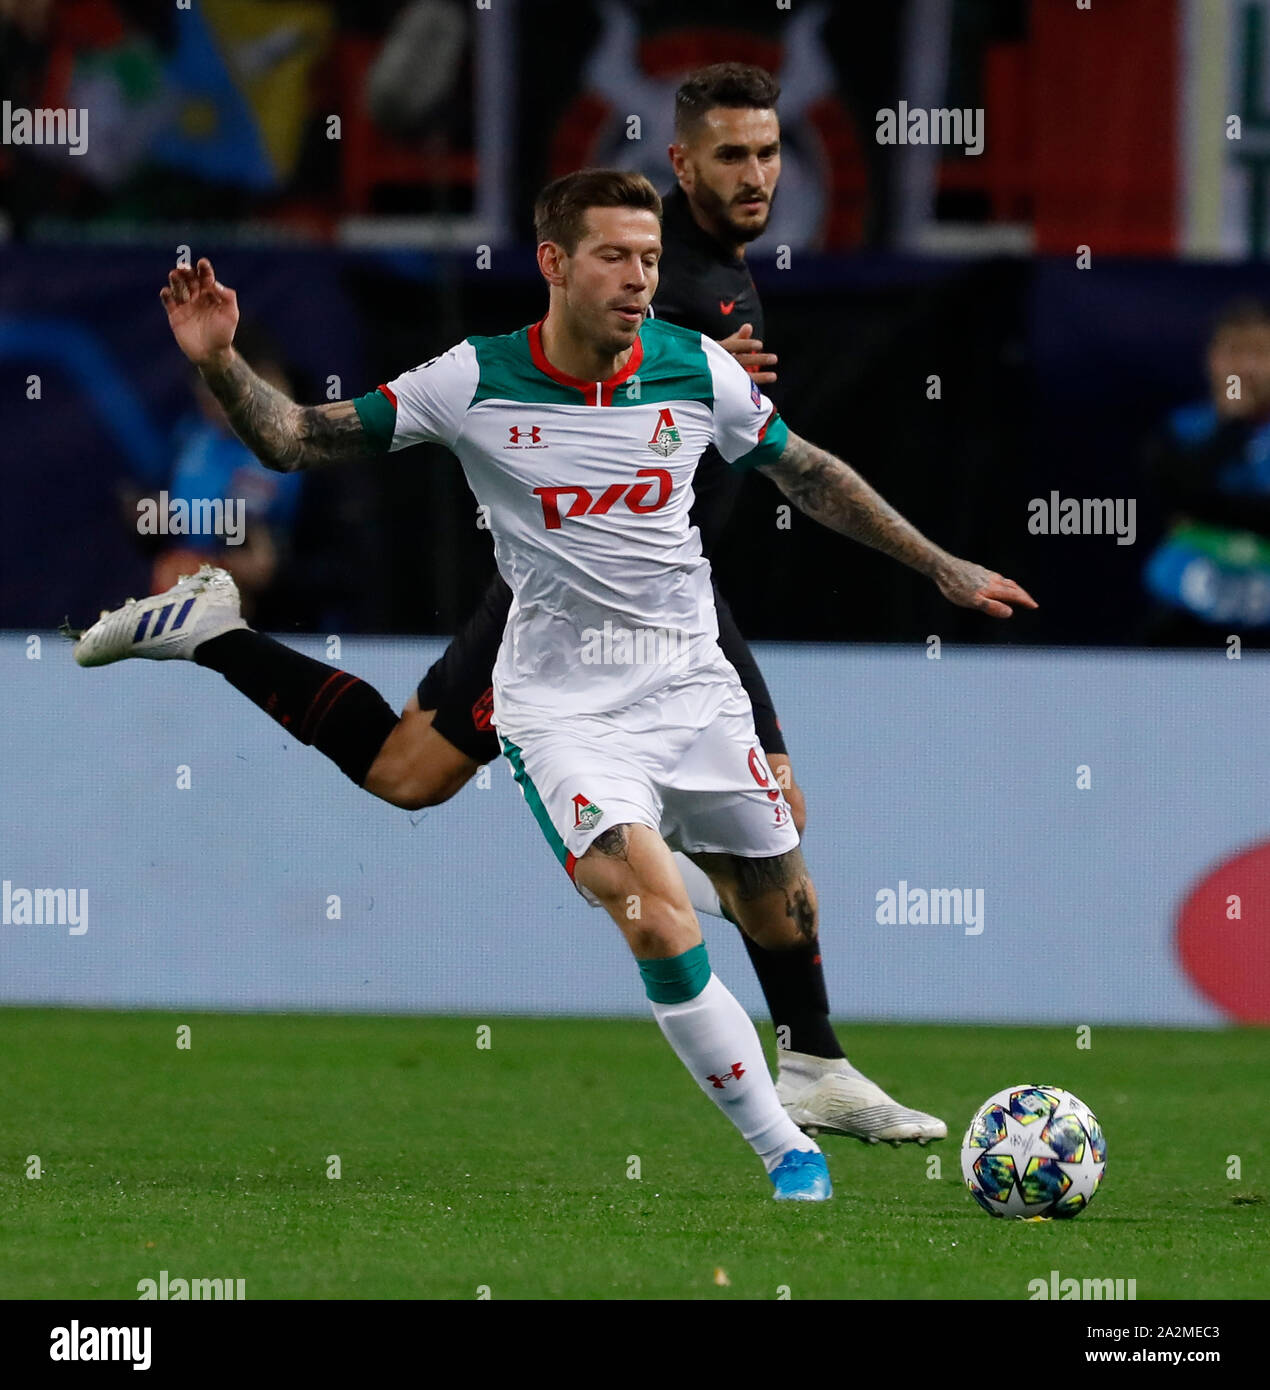 MOSCOW, RUSSIA - OCTOBER 01: Fyodor Smolov of Lokomotiv Moskva and Koke of Atletico Madrid vie for the ball during the UEFA Champions League group D match between Lokomotiv Moskva and Atletico Madrid at RZD Arena on October 1, 2019 in Moscow, Russia. (Photo by MB Media) Stock Photo